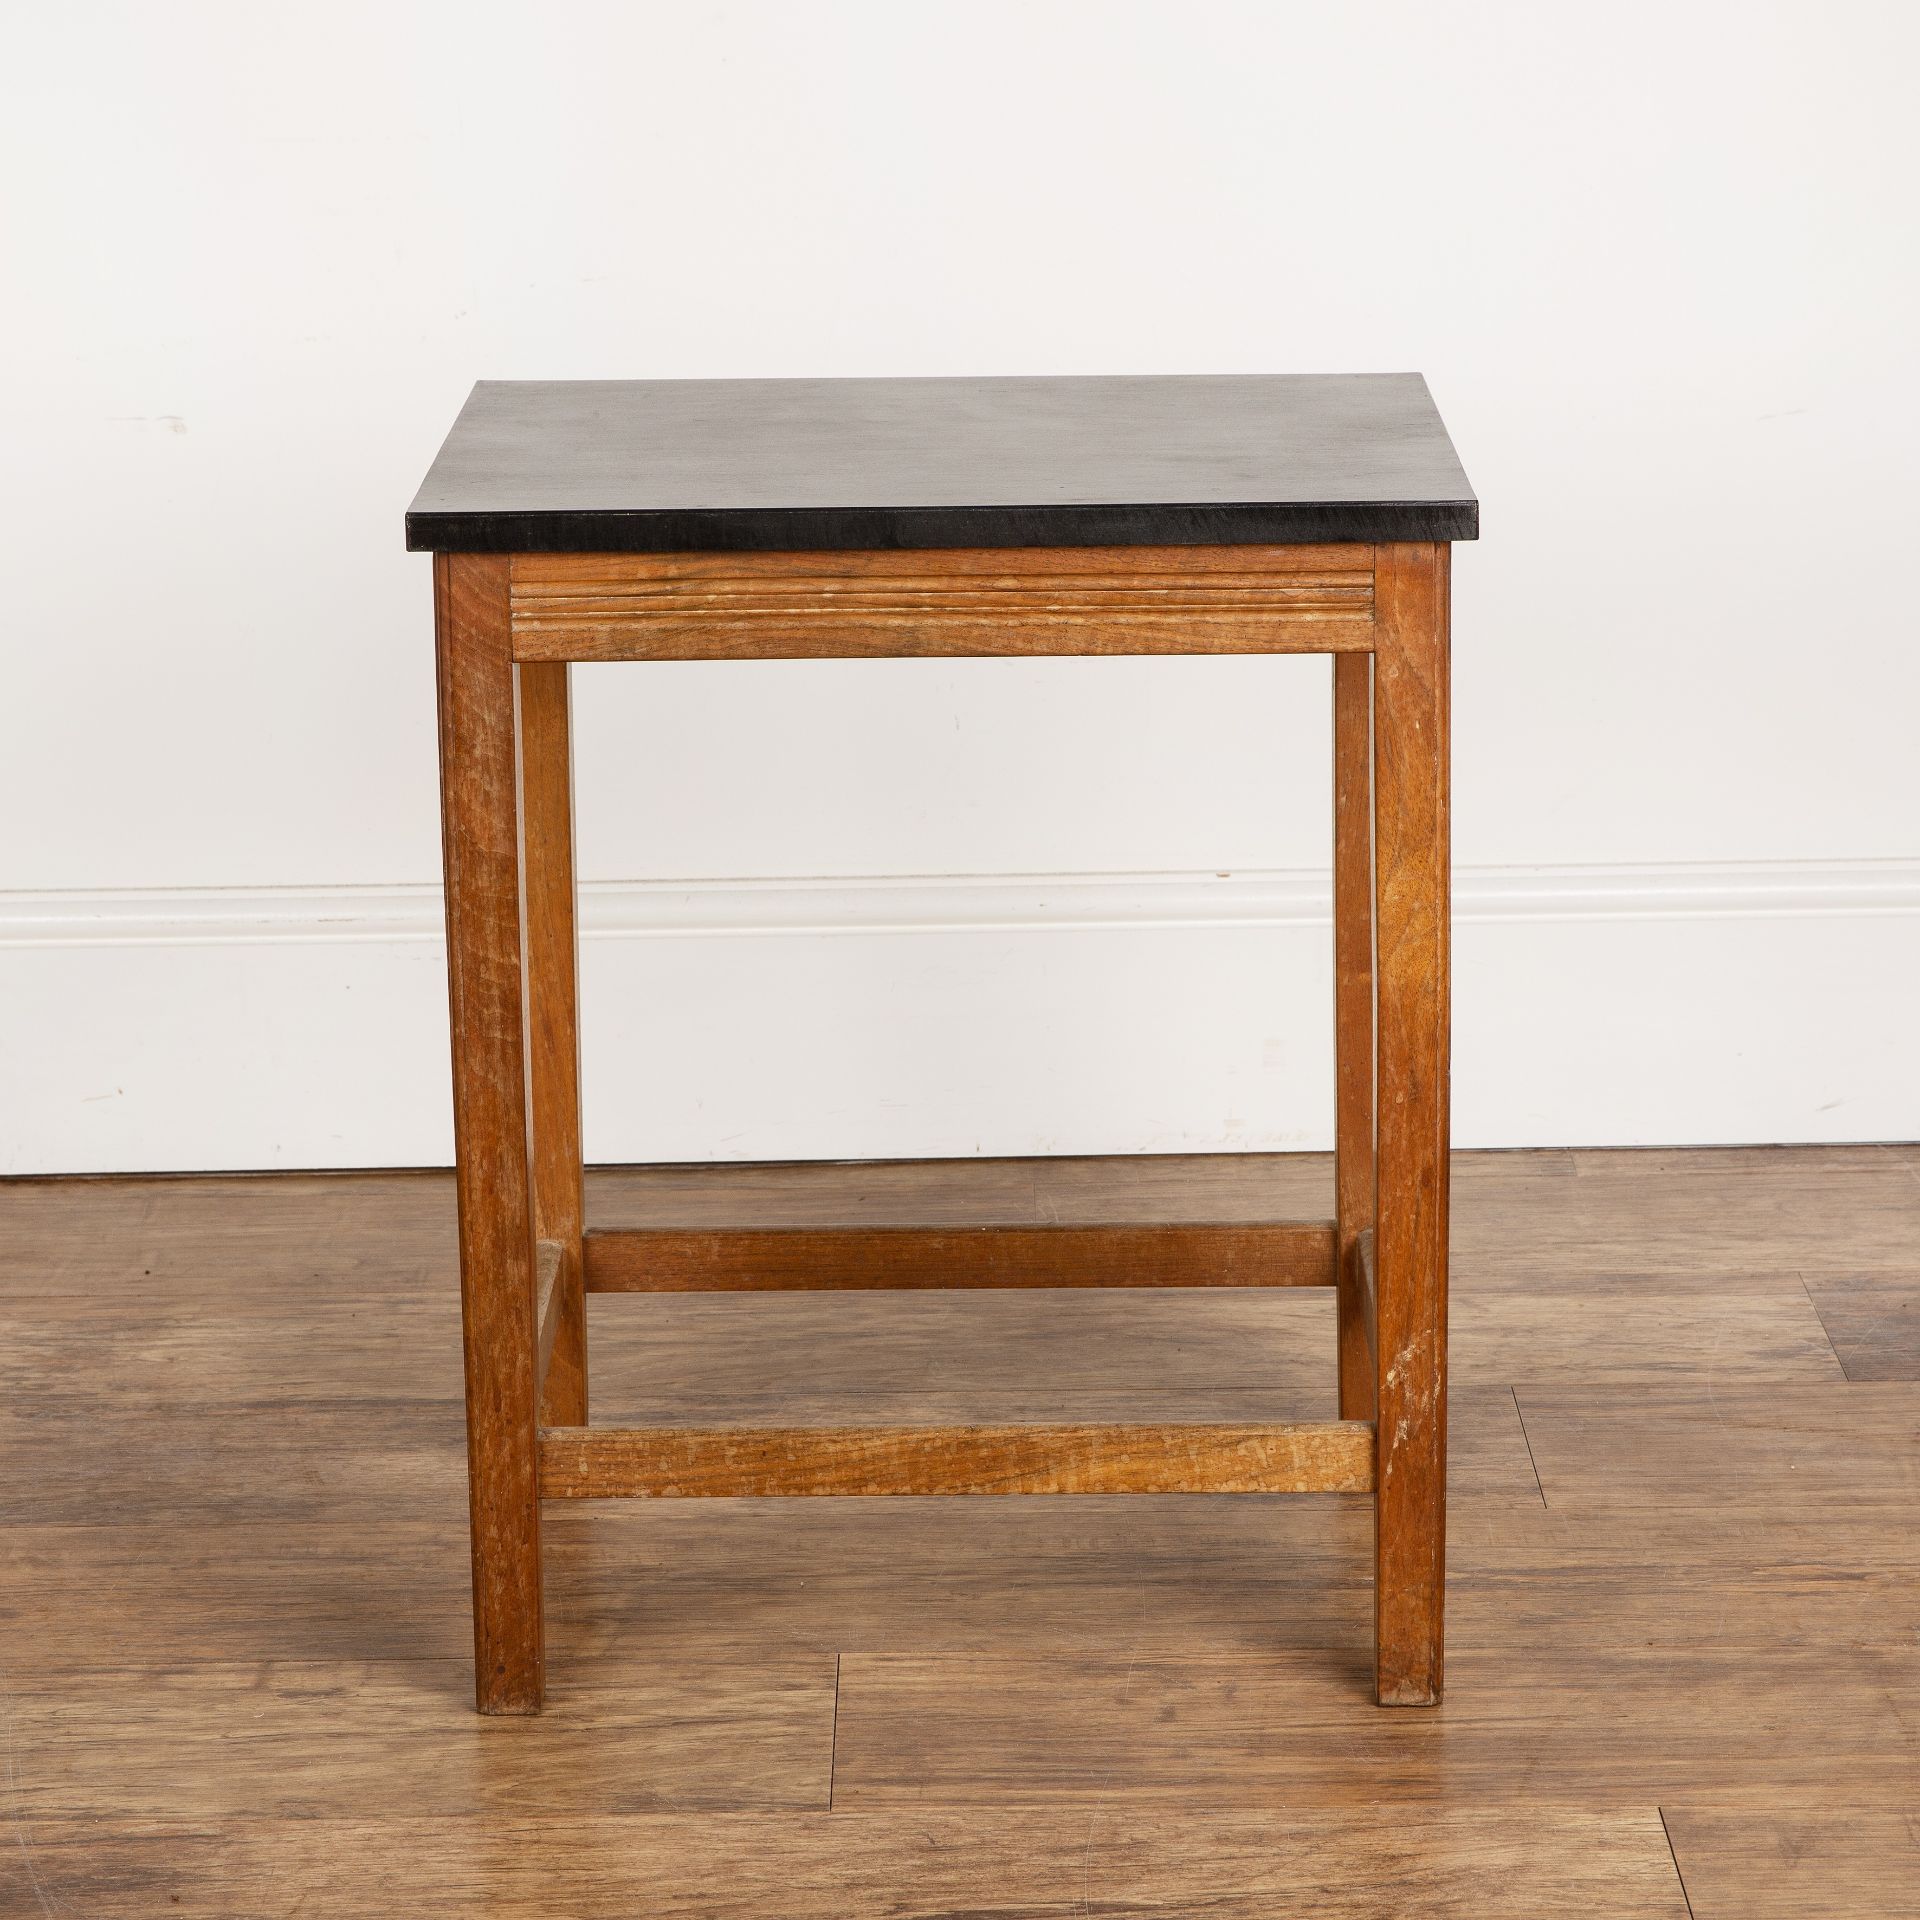 Gordon Russell (1892-1980) of Broadway oak framed table with black rectangular top, with copper - Image 2 of 6